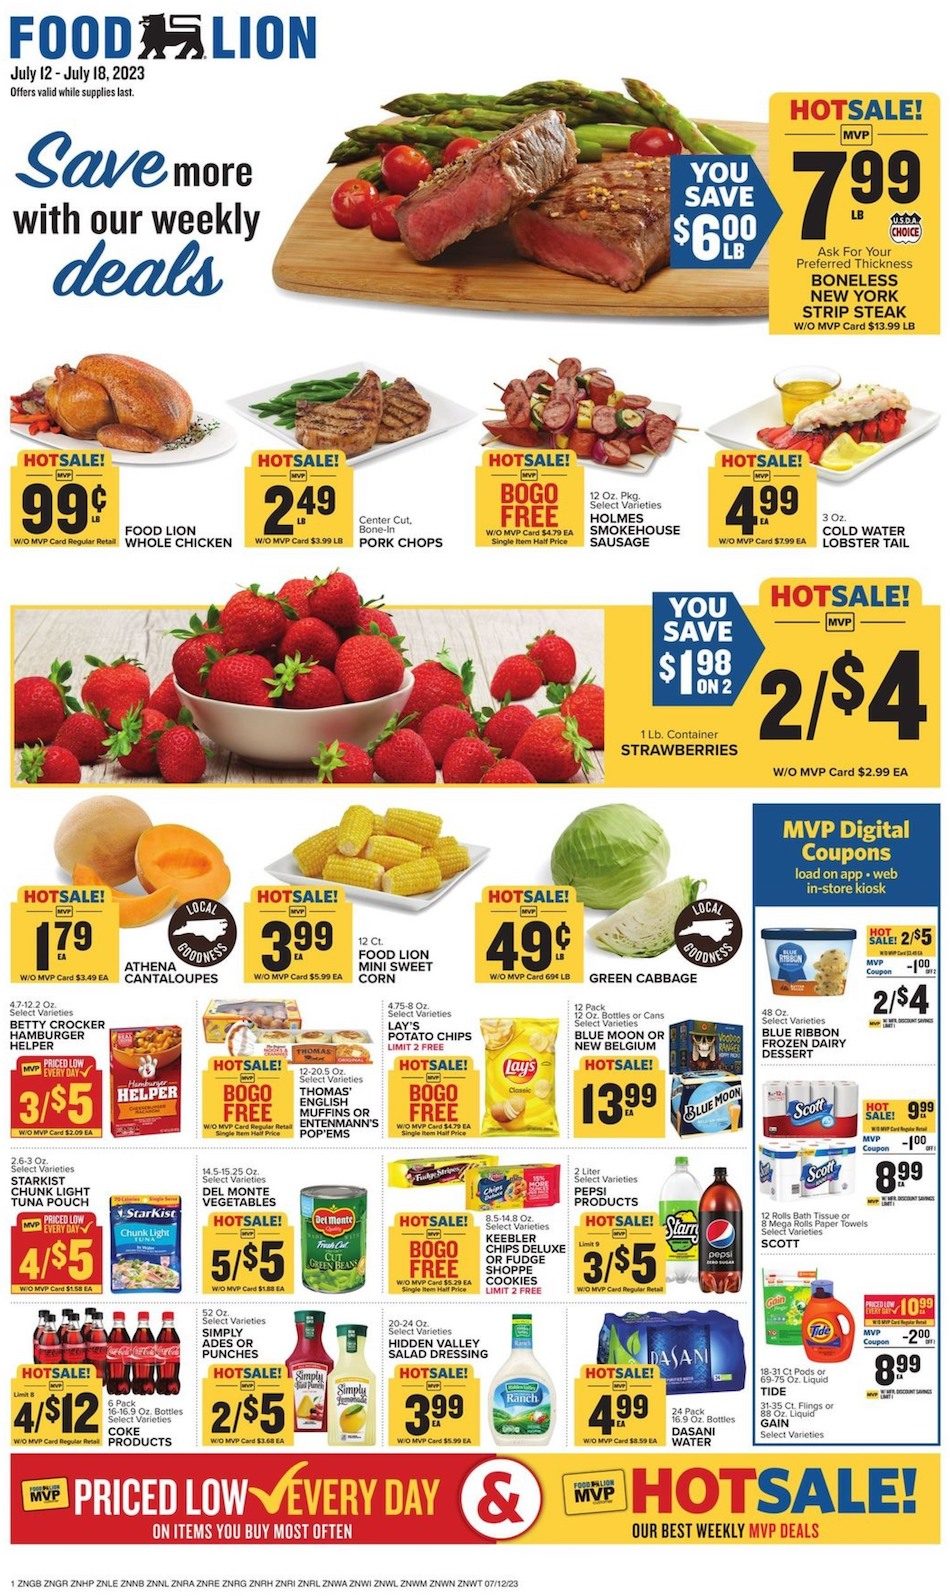 Food Lion Weekly Ad 12th – 18th July 2023 Page 1